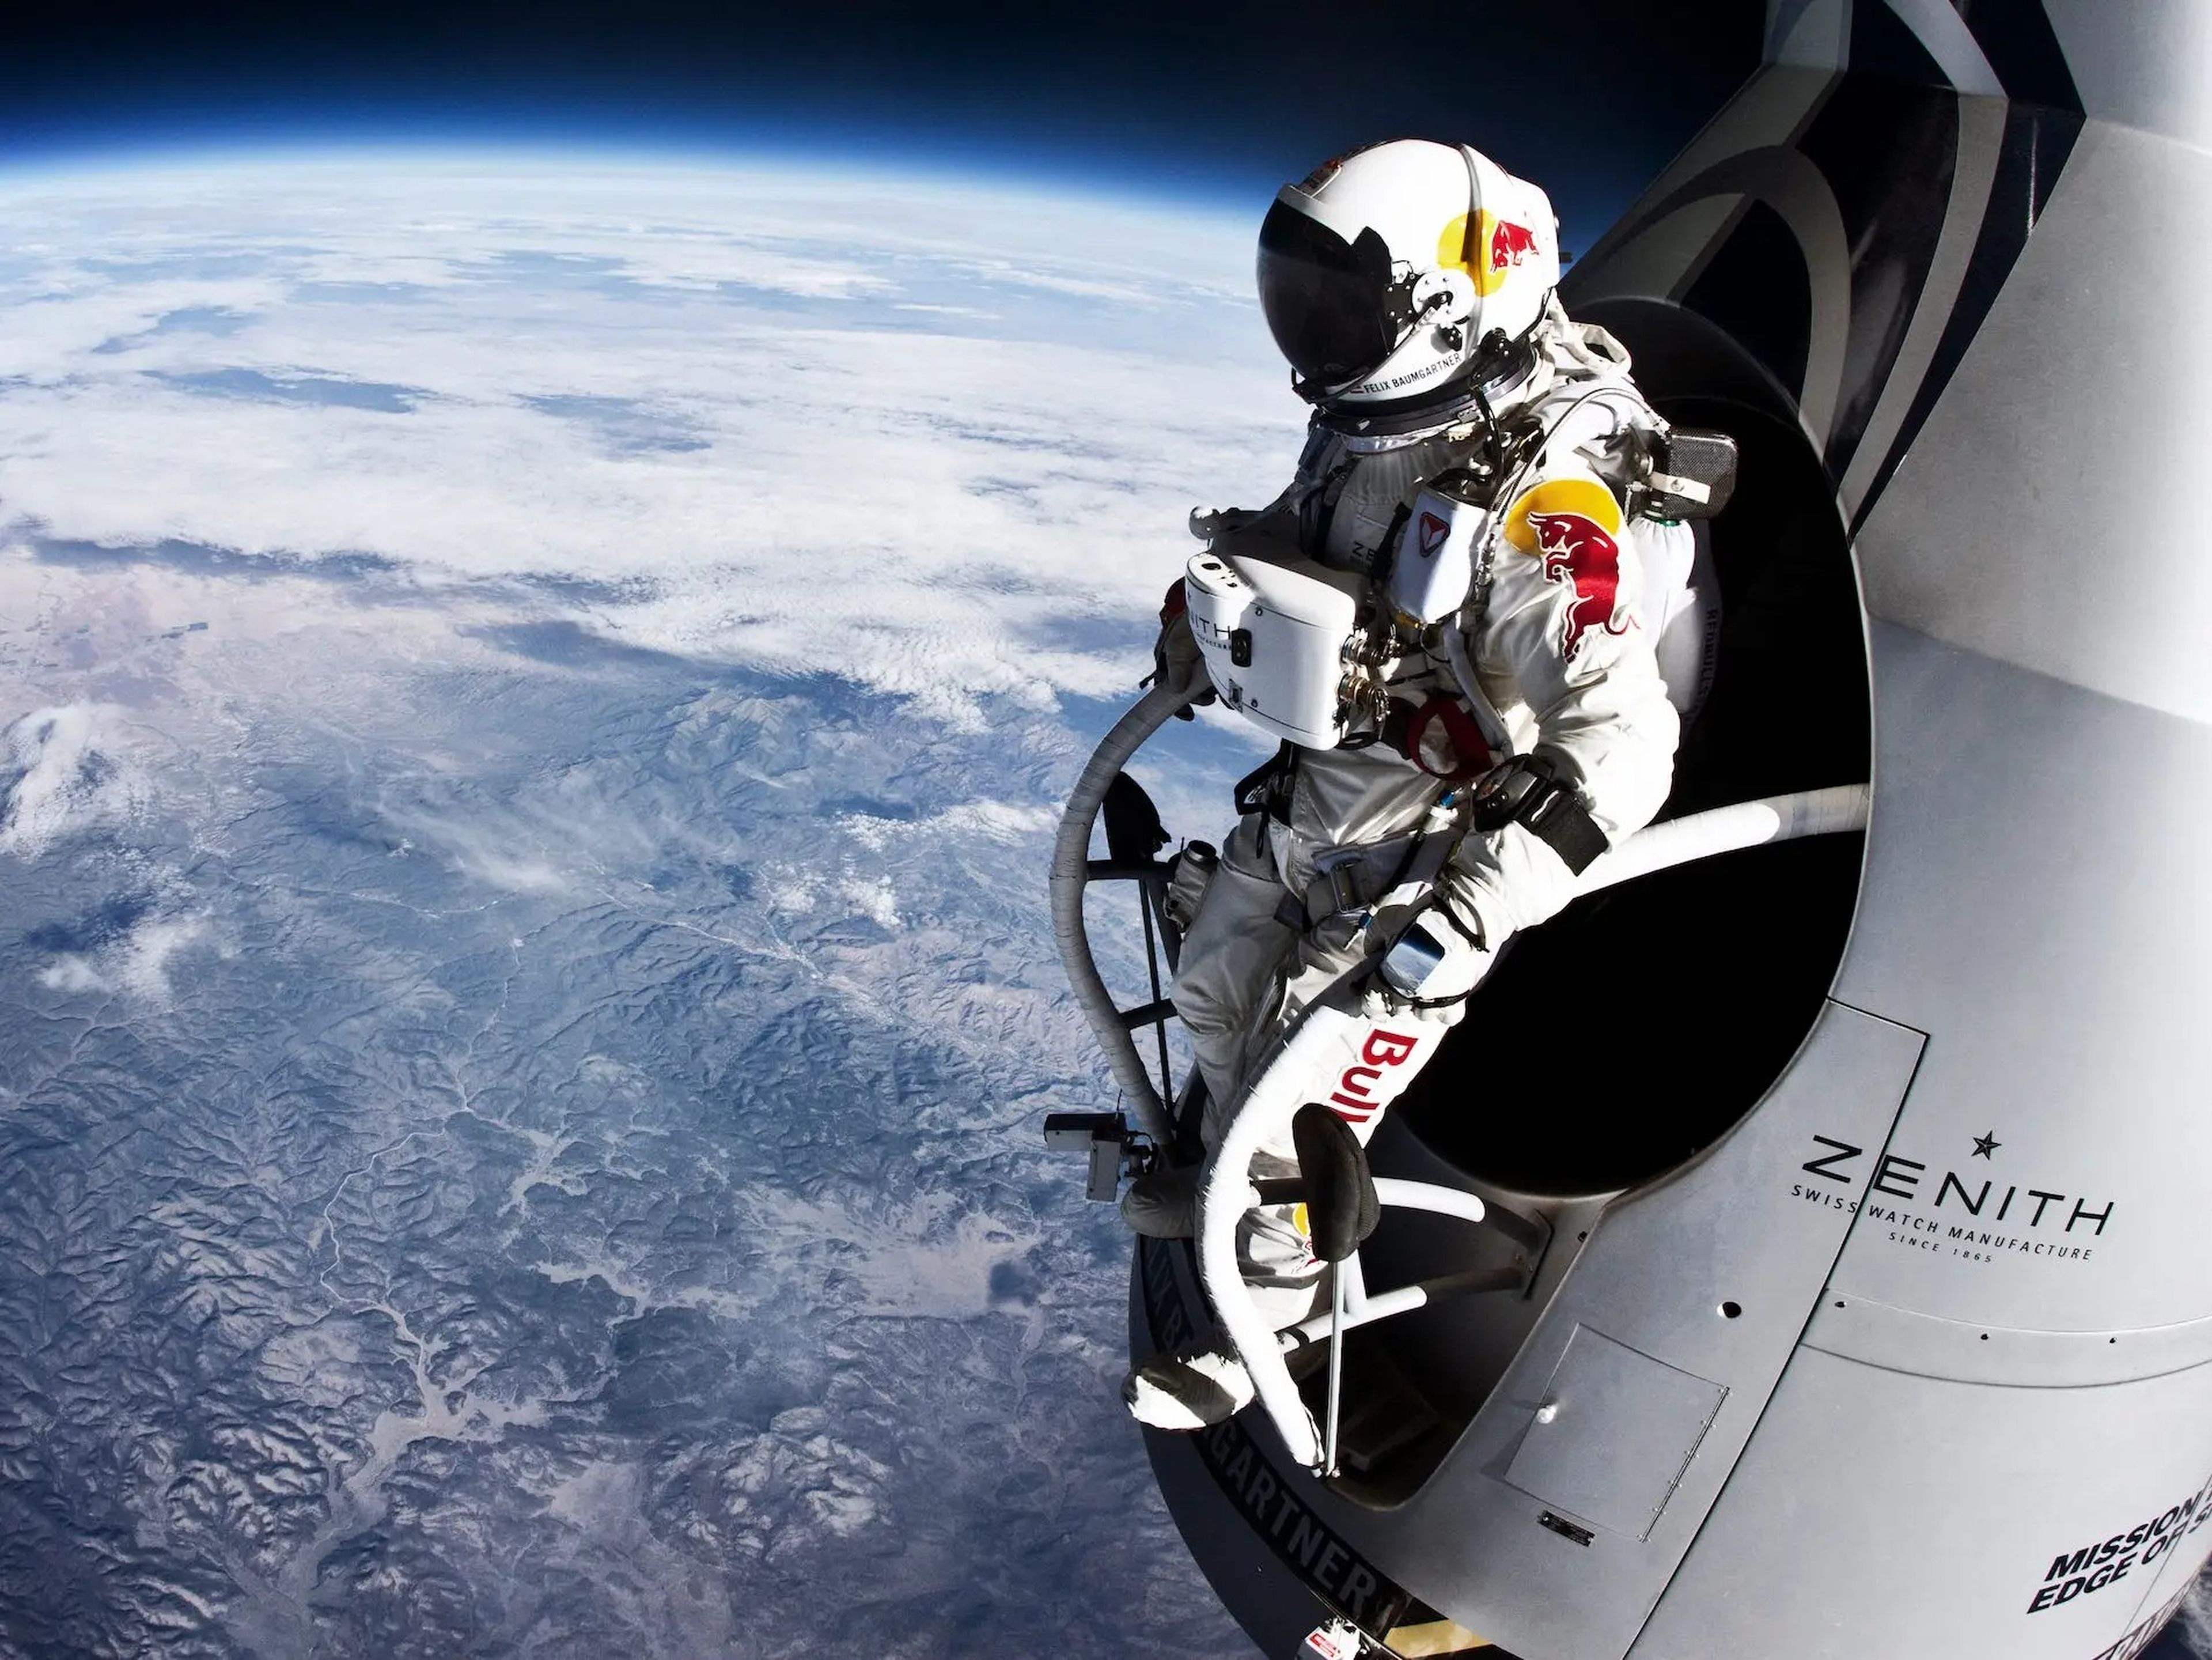 Red Bull daredevil Felix Baumgartner prepares for his record-breaking 128,000-foot free fall from the stratosphere on Outside Television's "Mission to the Edge of Space."